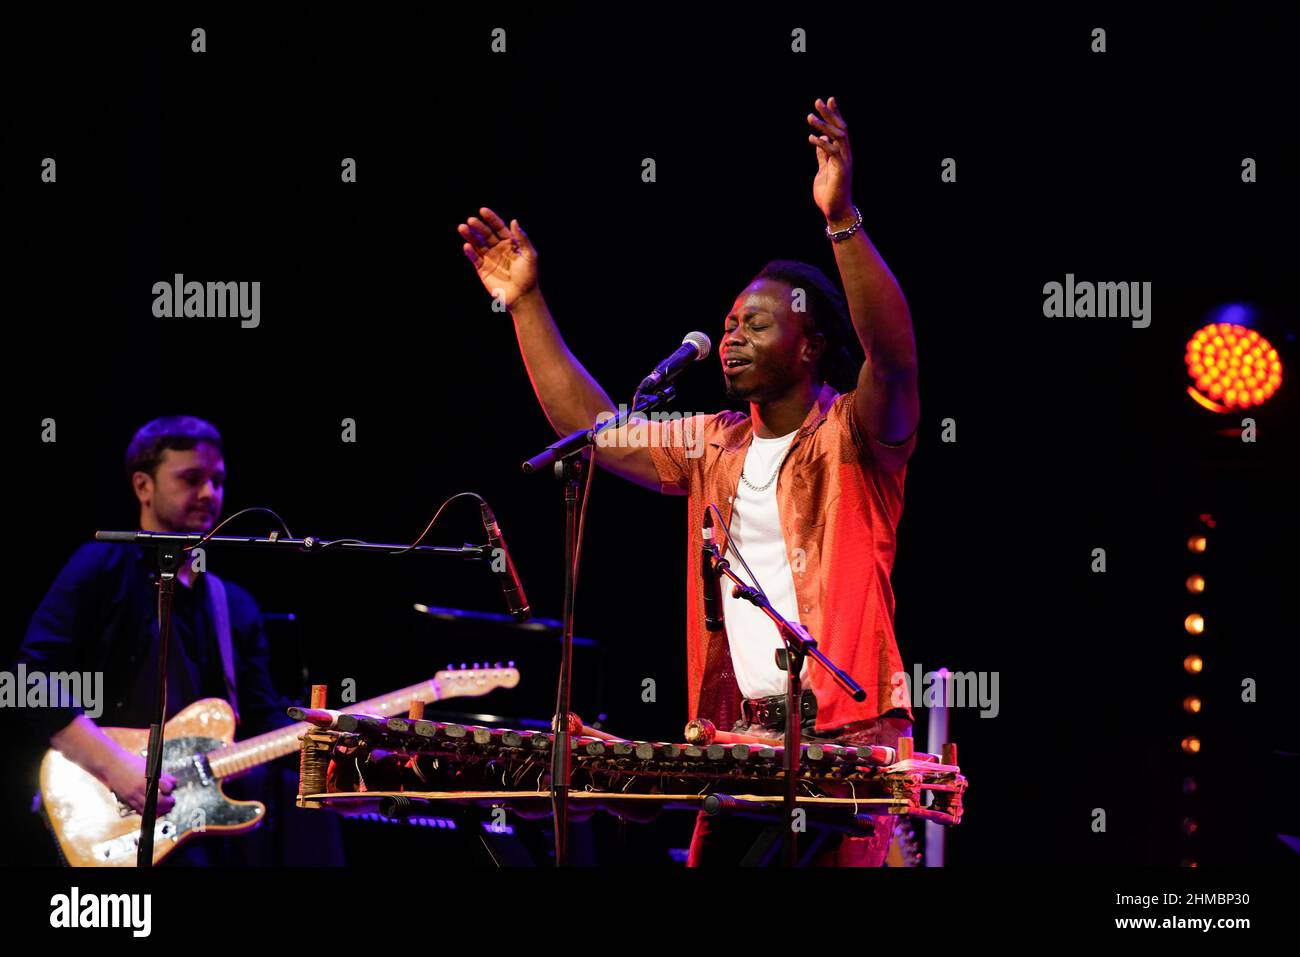 Glasgow Scotland, 5th February 2022. N’famady Kouyaté, Guinea west Africa multi-instrumentalist musician, performed at the Glasgow Theatre Royal at Ce Stock Photo